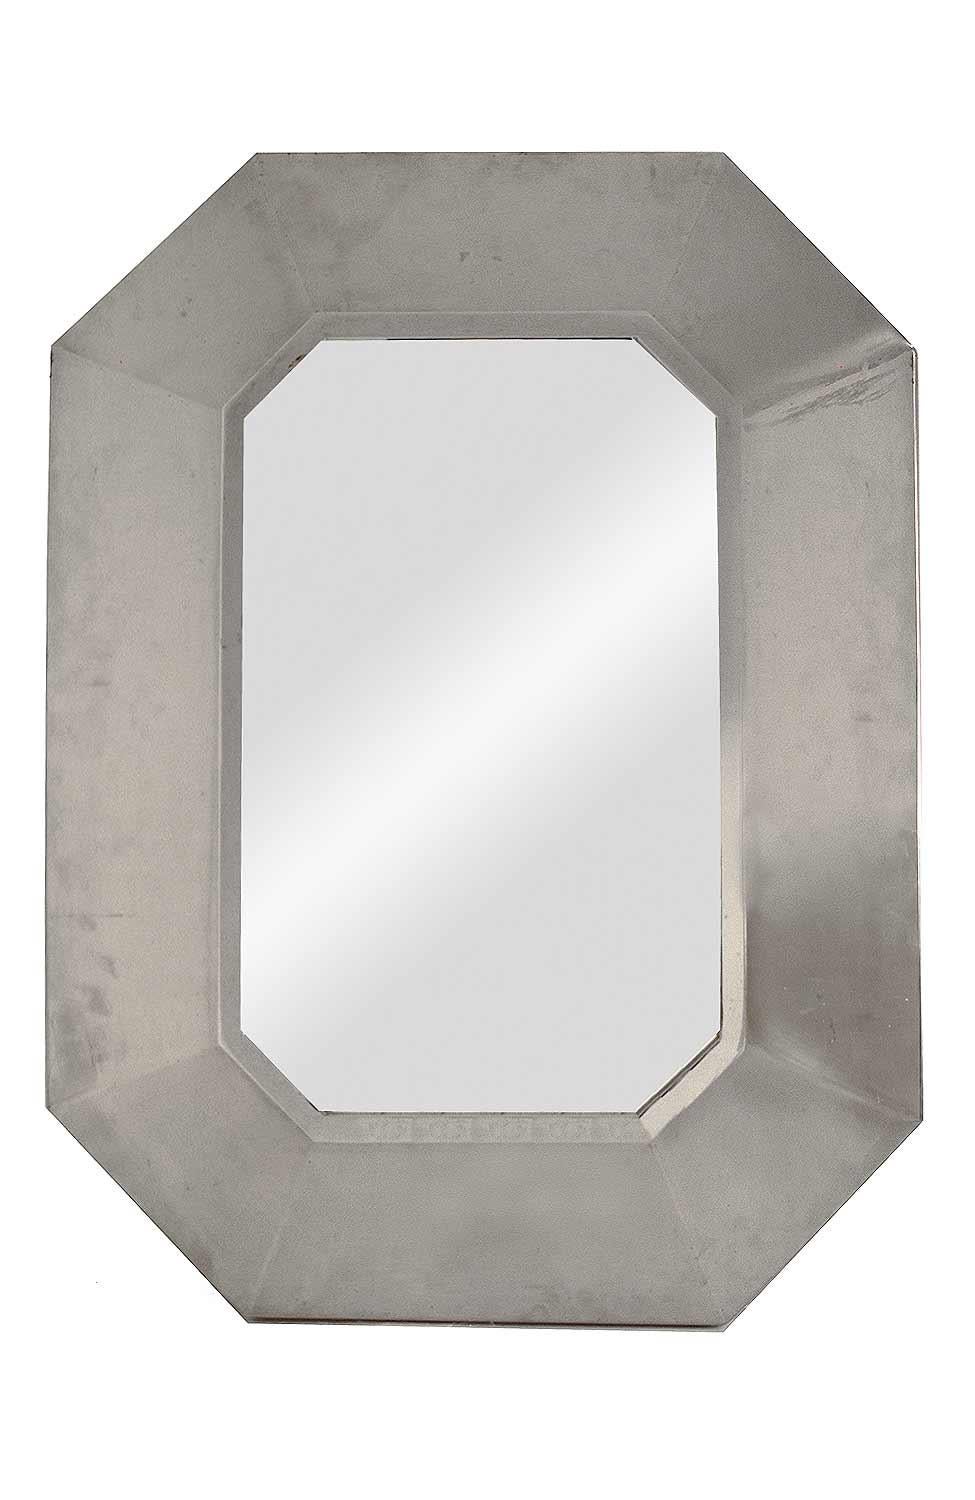 Octagonal mirror with an large steel frame and an inner rectangular shaped wand.
Wood structure at the back.
Some marks on the mirror essentially due to age. A spot on the mirror, bottom left.
Work attributed to Maison Jansen, circa 1970s.
 